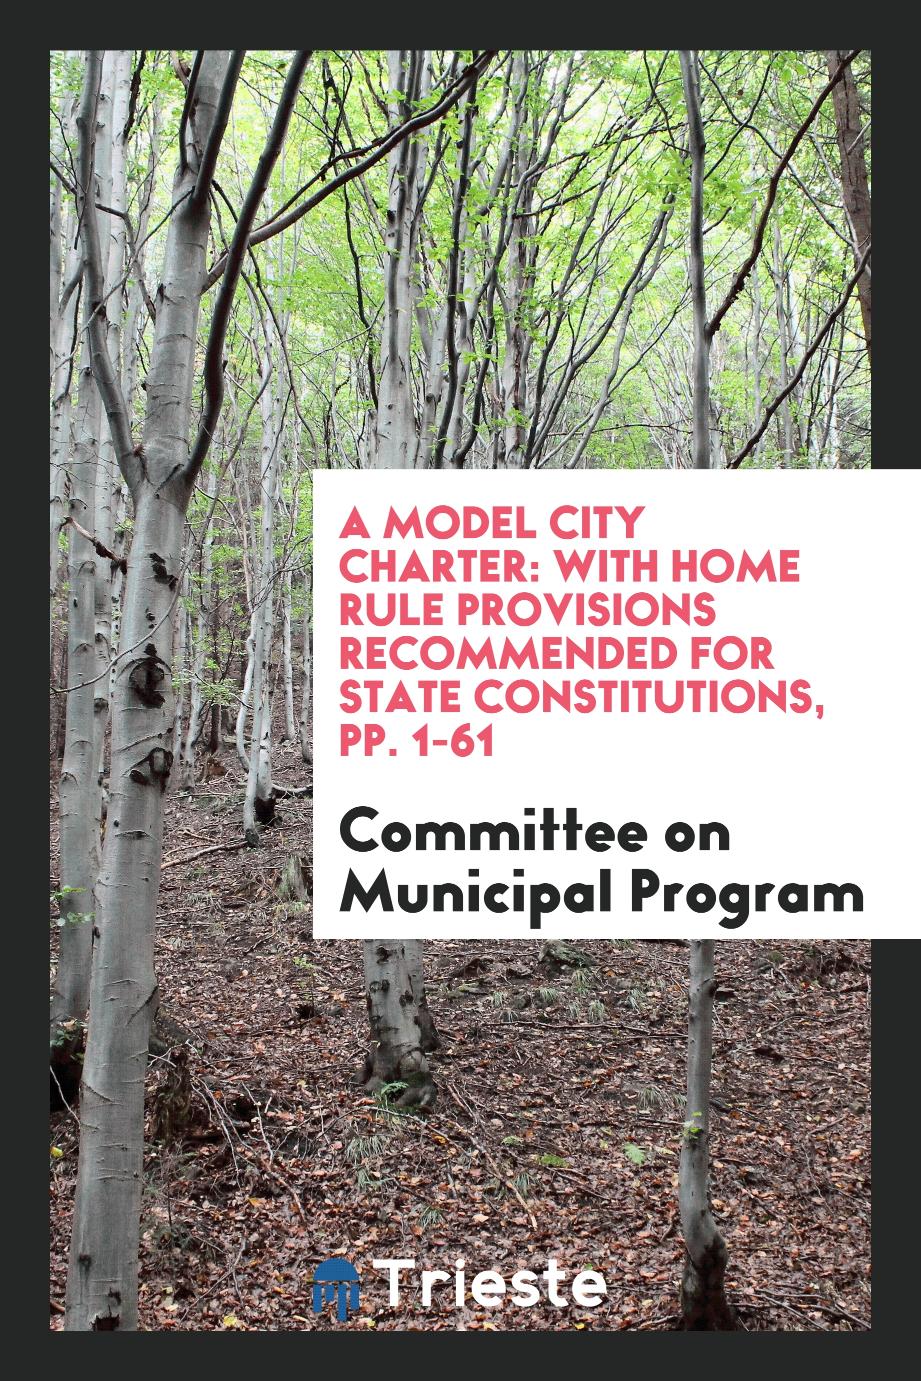 A Model City Charter: With Home Rule Provisions Recommended for State Constitutions, pp. 1-61